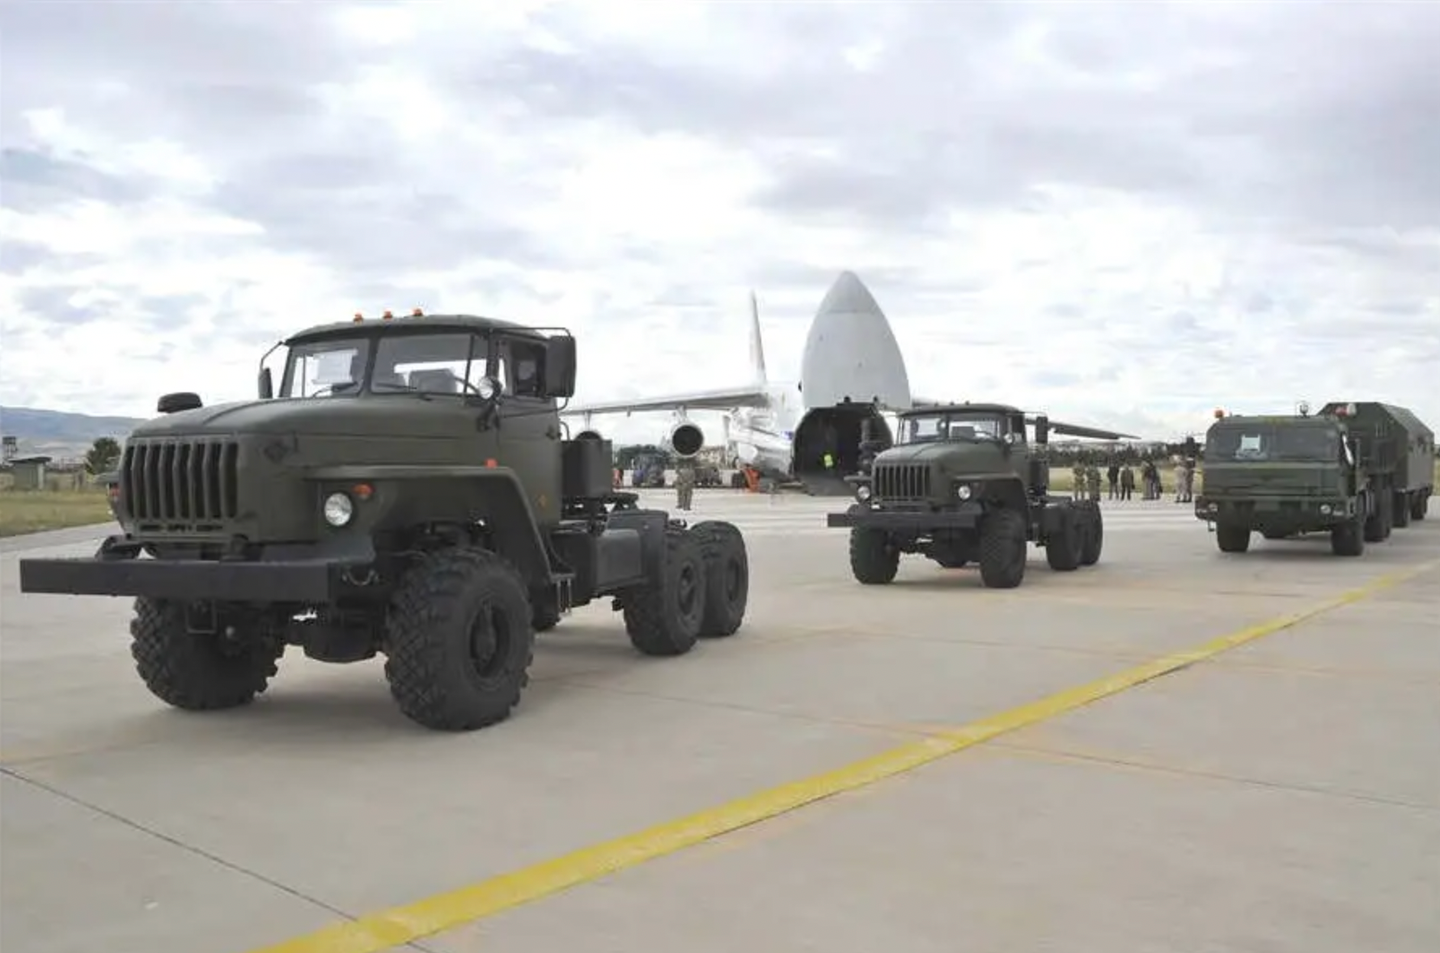 Trucks associated with the S-400 air defense system arrive at Murted Air Base in Turkey, in July 2019. <em>TURKISH MINISTRY OF NATIONAL DEFENSE</em>